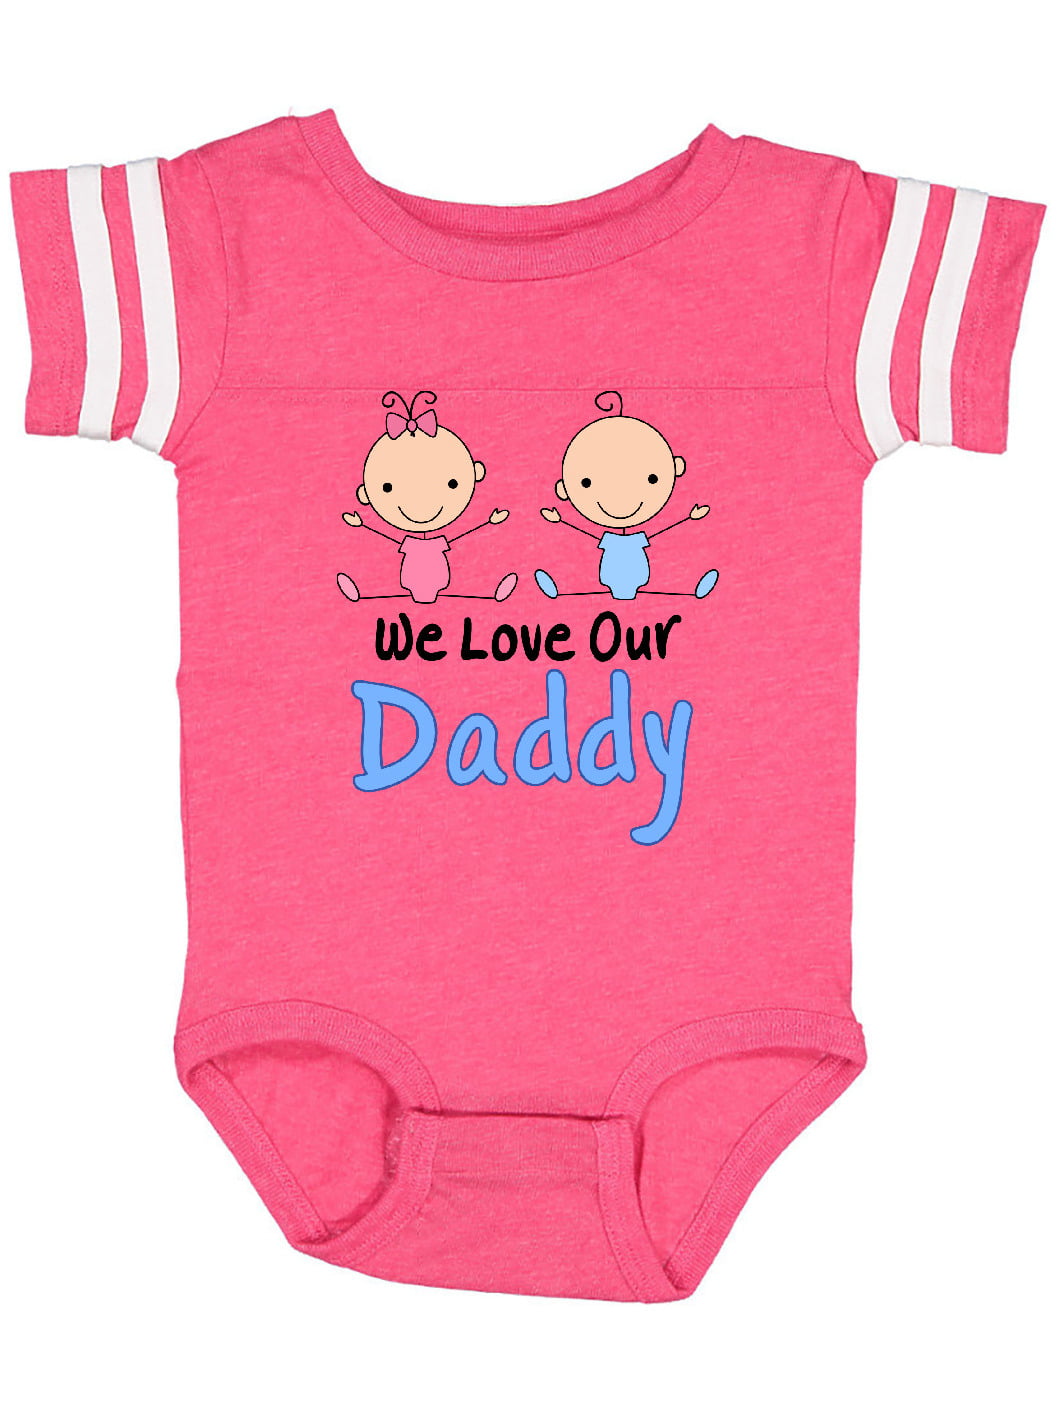 Personalised baby bodysuit vest grow 1st fathers day daddy giraffe present gift 